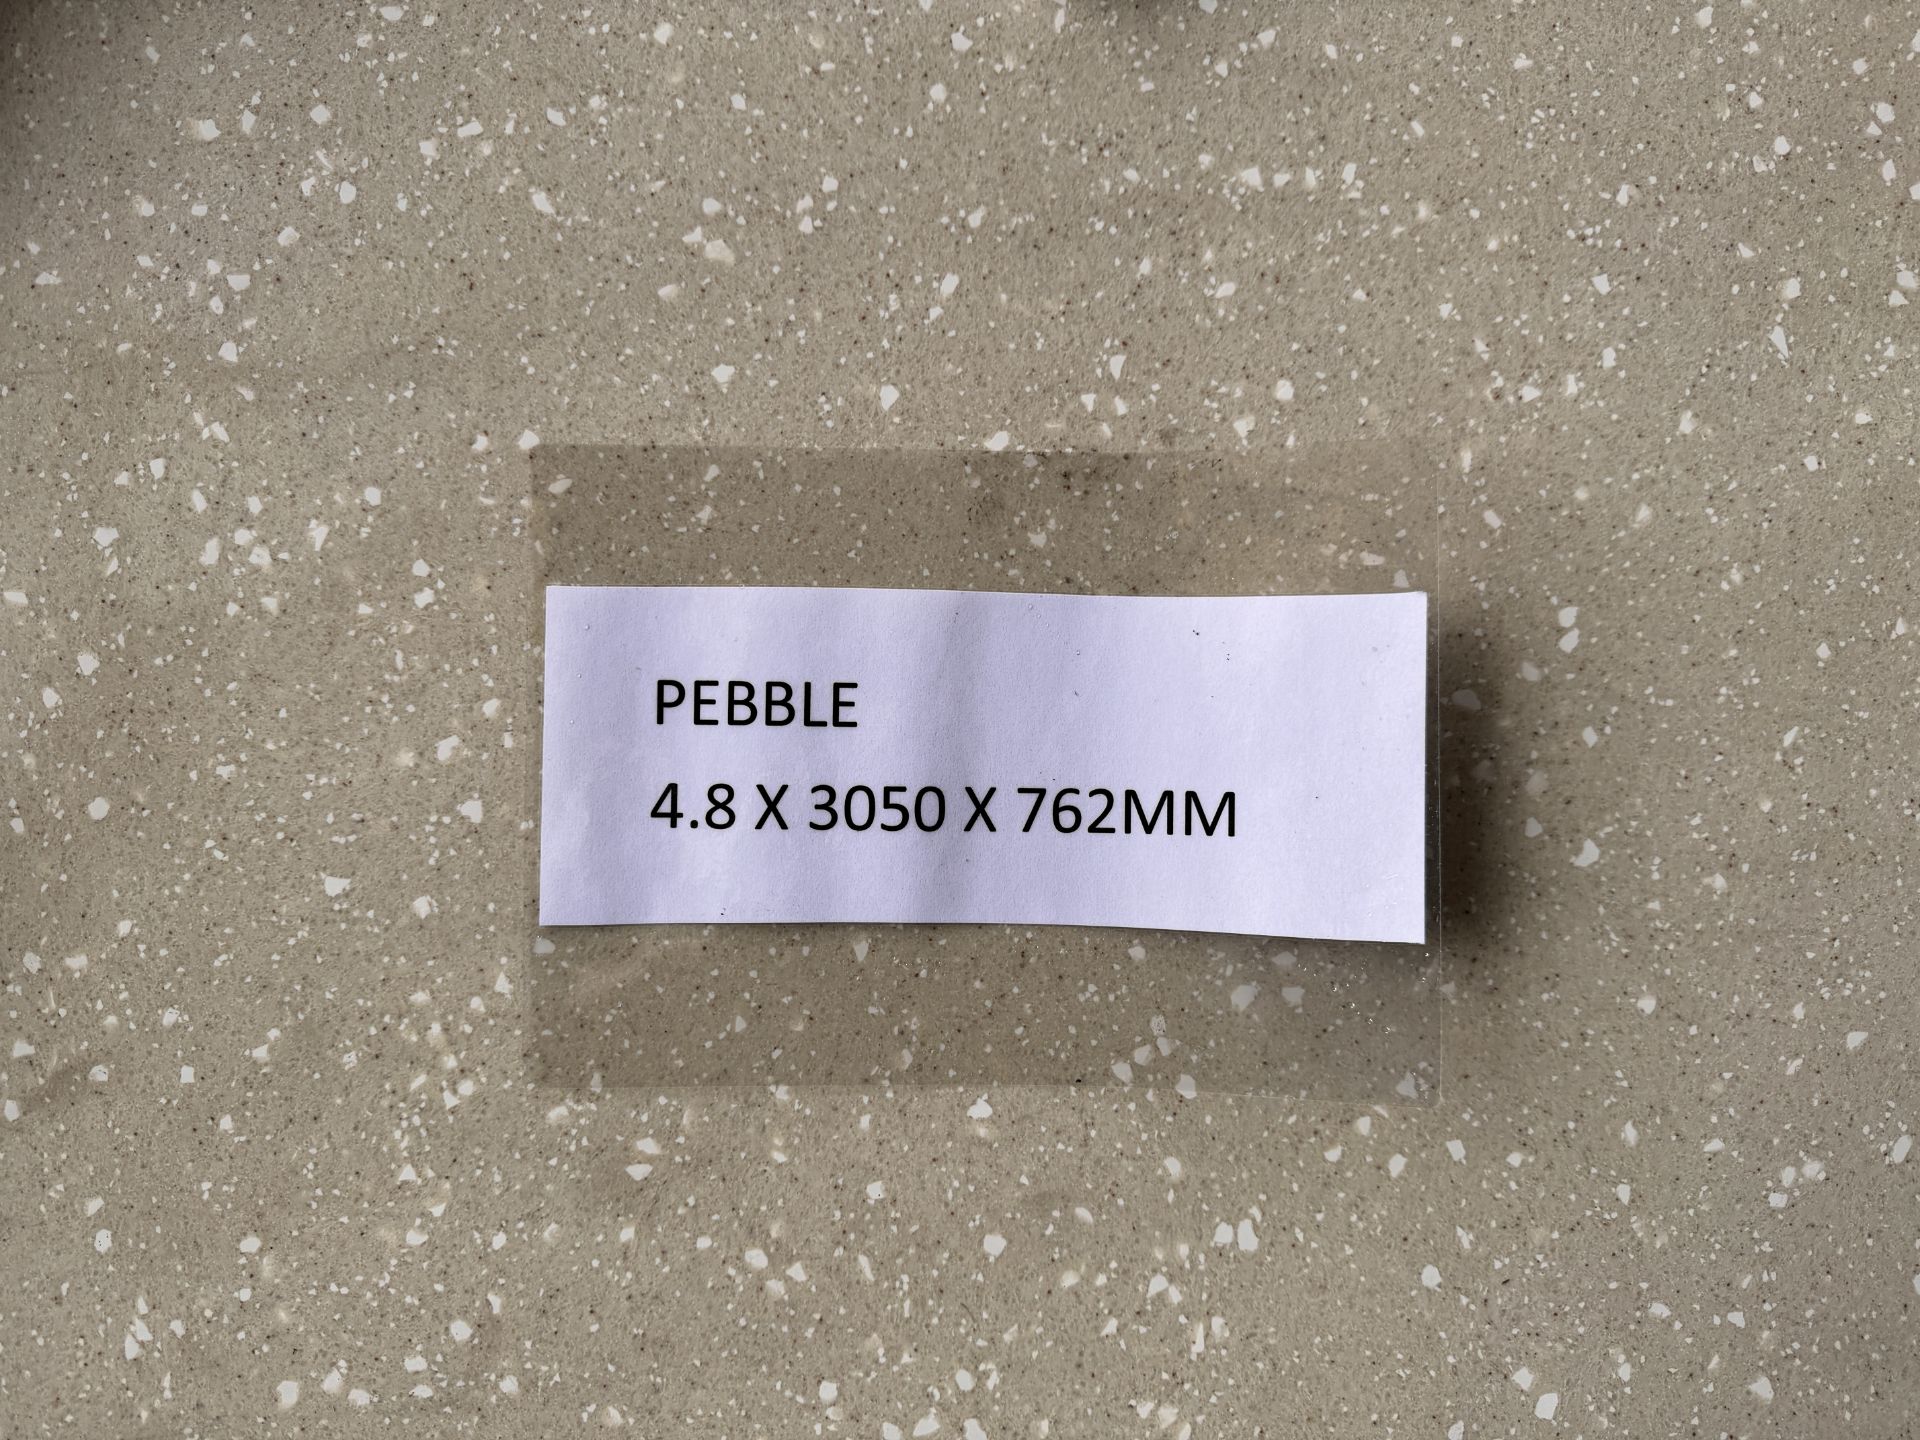 X4 Decorative Acrylic Wall Panel Sheets - Colour: Pebble - Size: 3050 x 762 x 4.8mm - Image 2 of 2